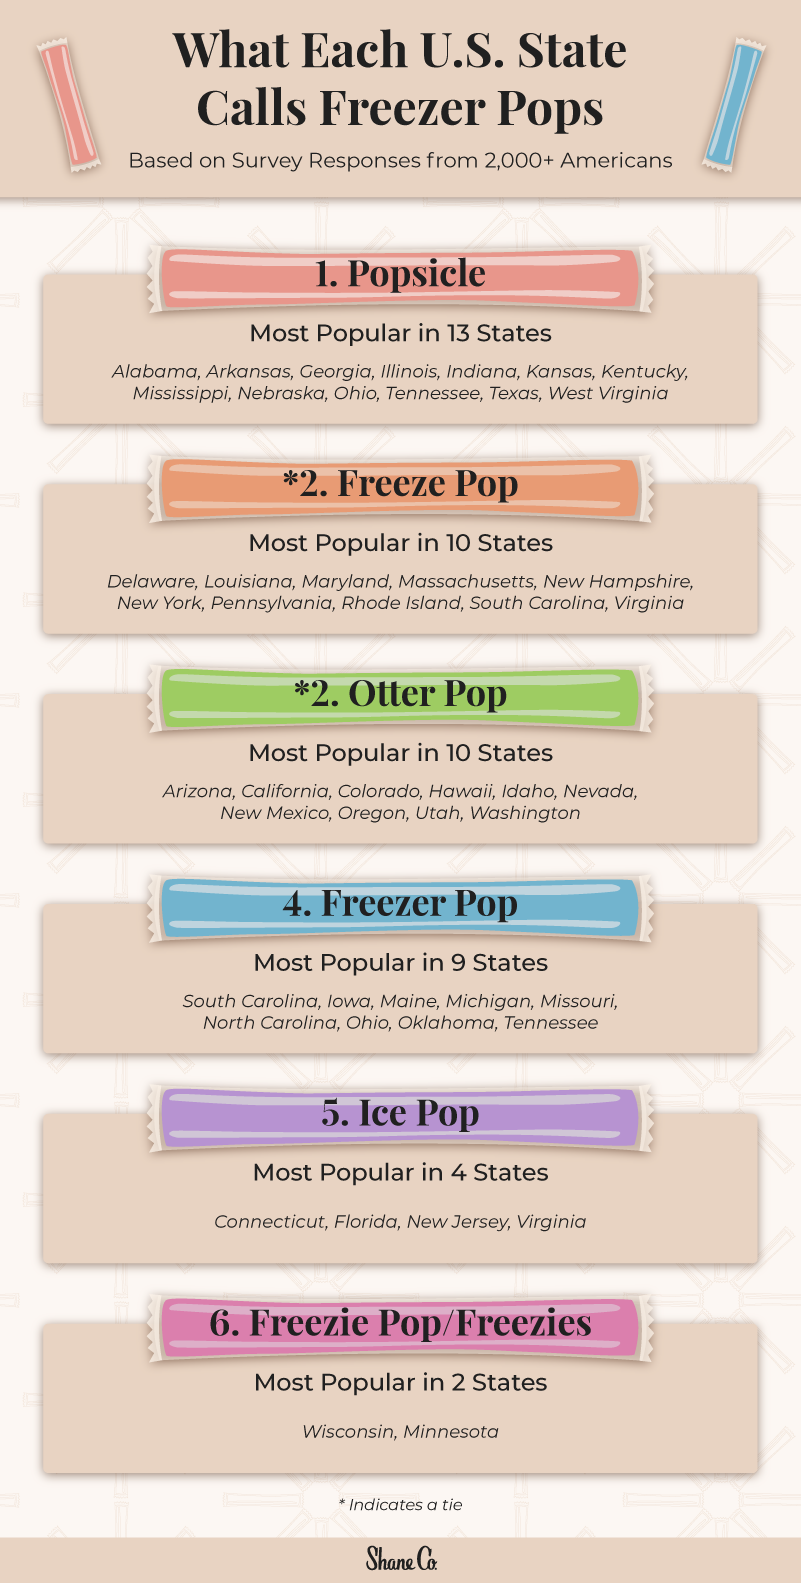 Freezer pop illustrations showing what each state calls the treat